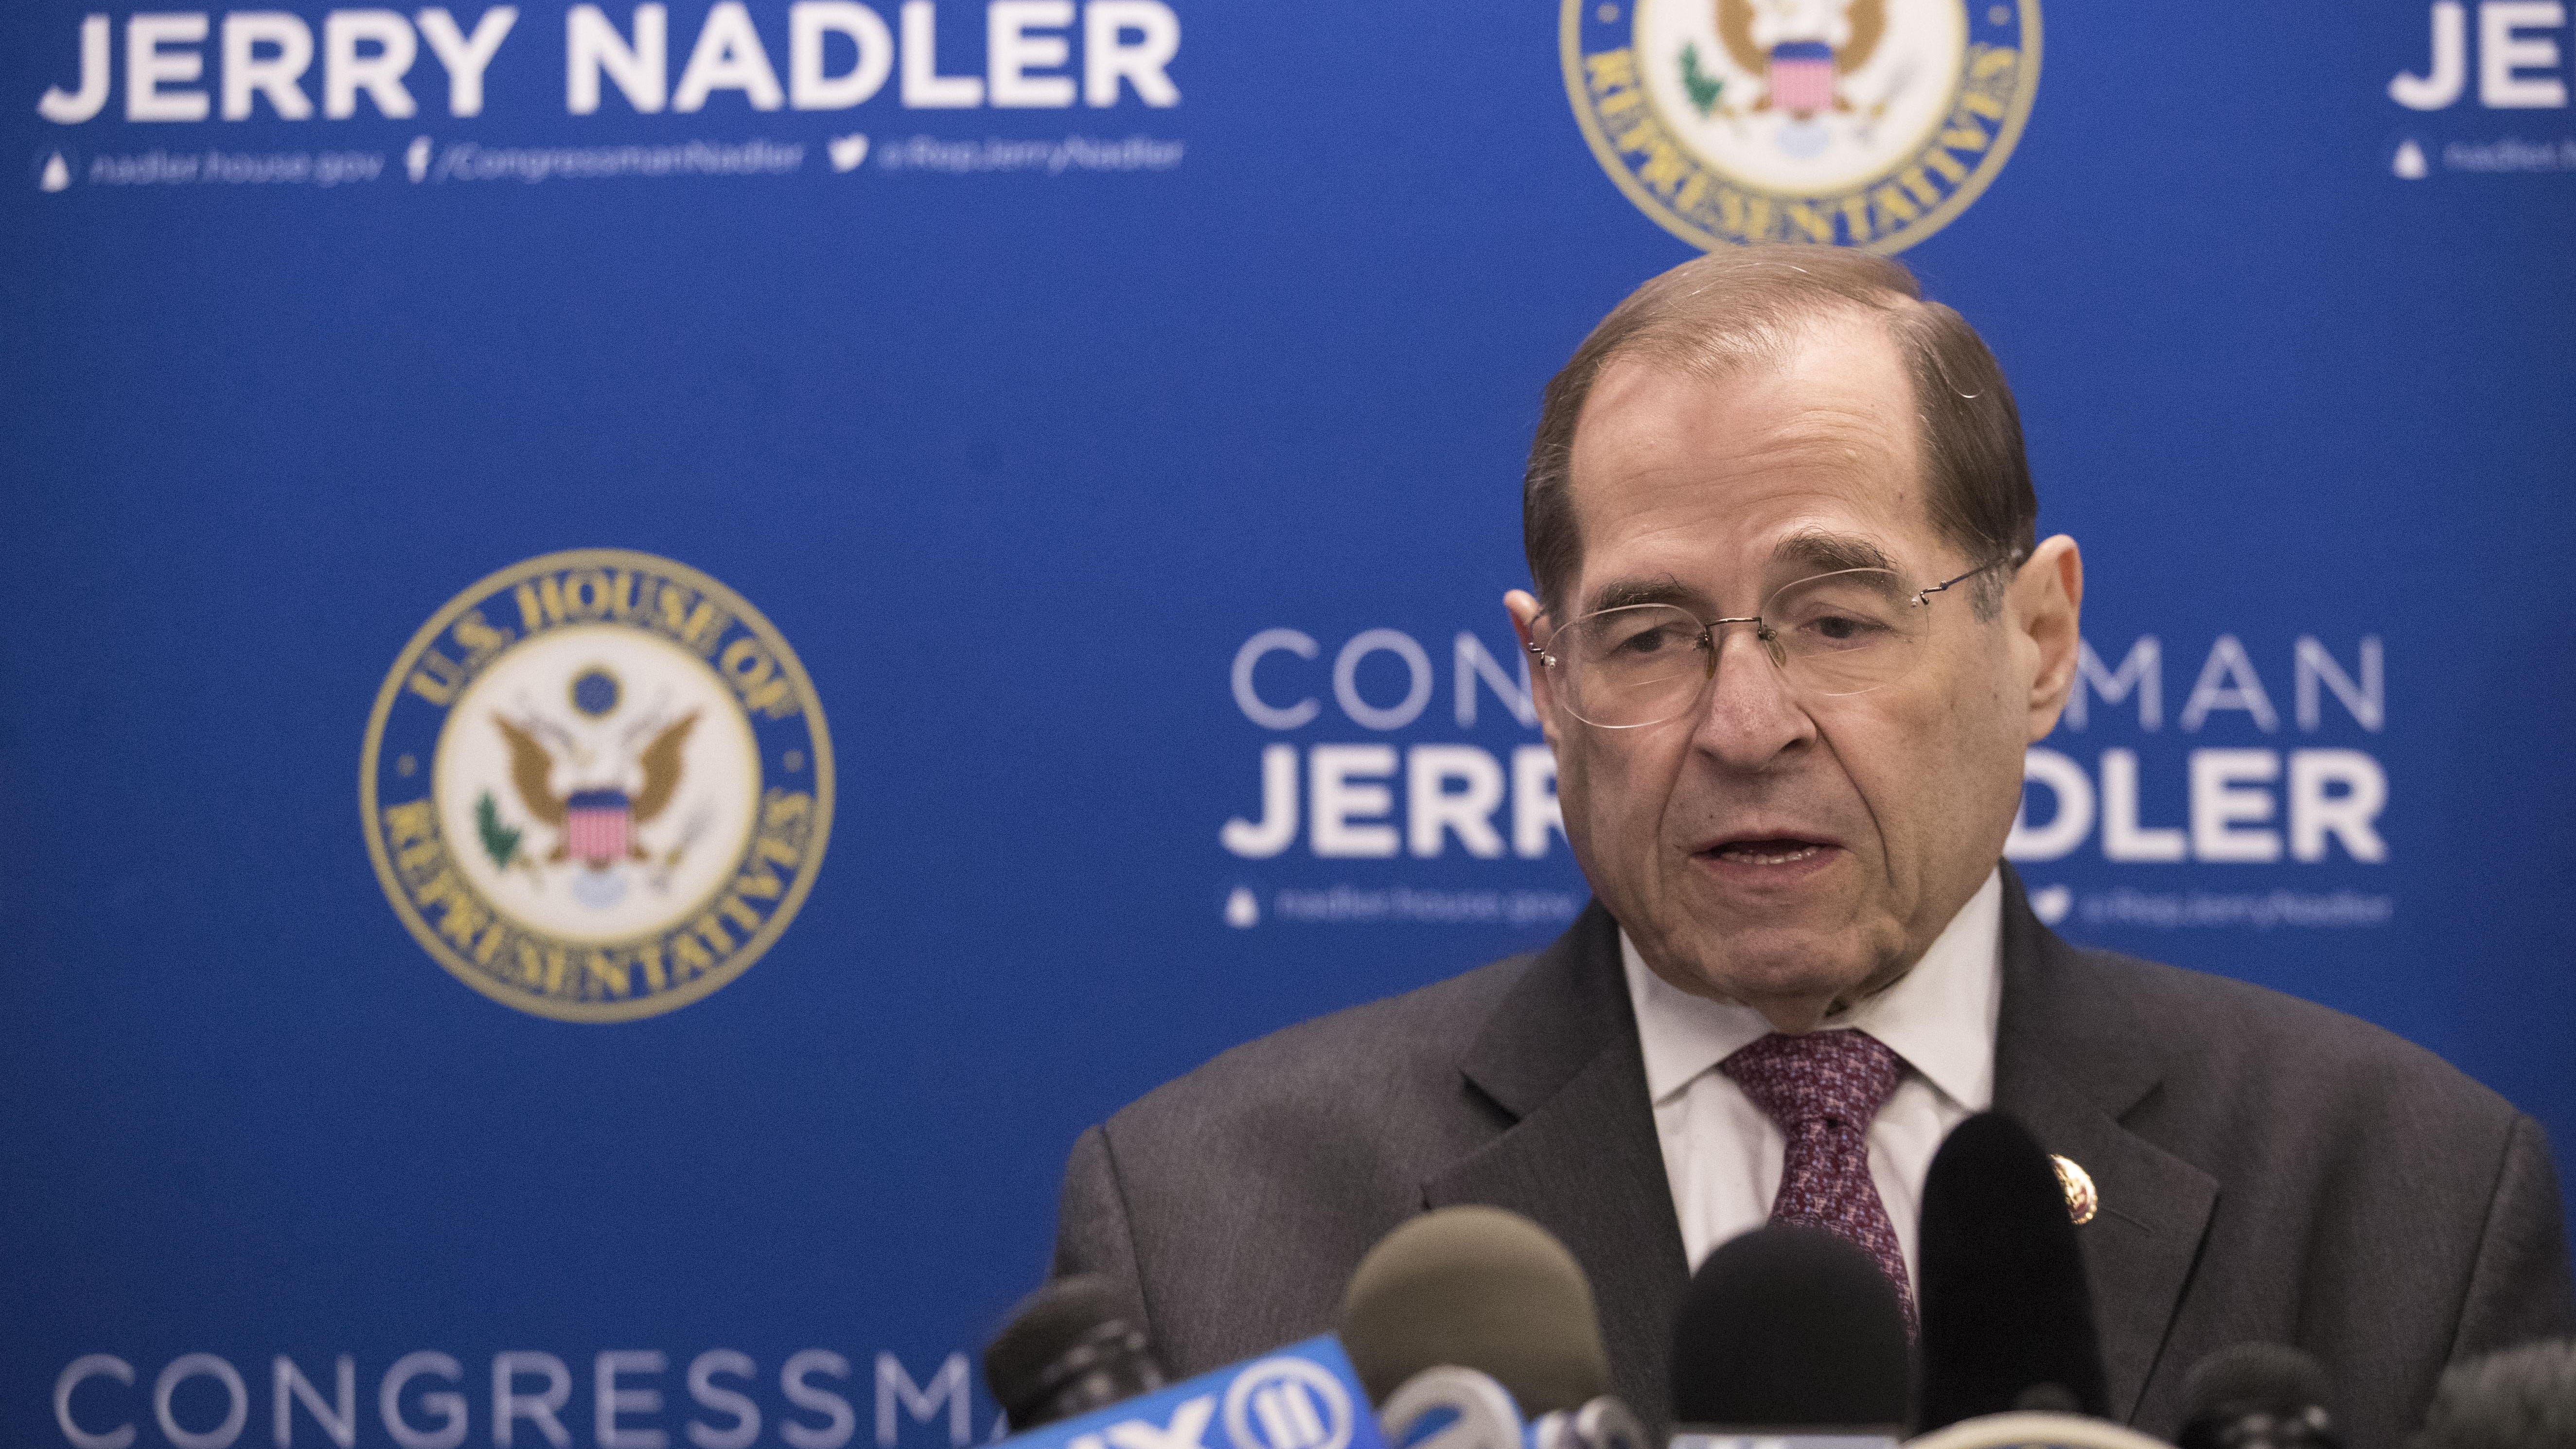 “It now falls to Congress to determine for itself the full scope of the misconduct and to decide what steps to take in the exercise of our duties of oversight, legislation and constitutional accountability,” House Judiciary Committee Chairman Jerrold Nadler said in a statement